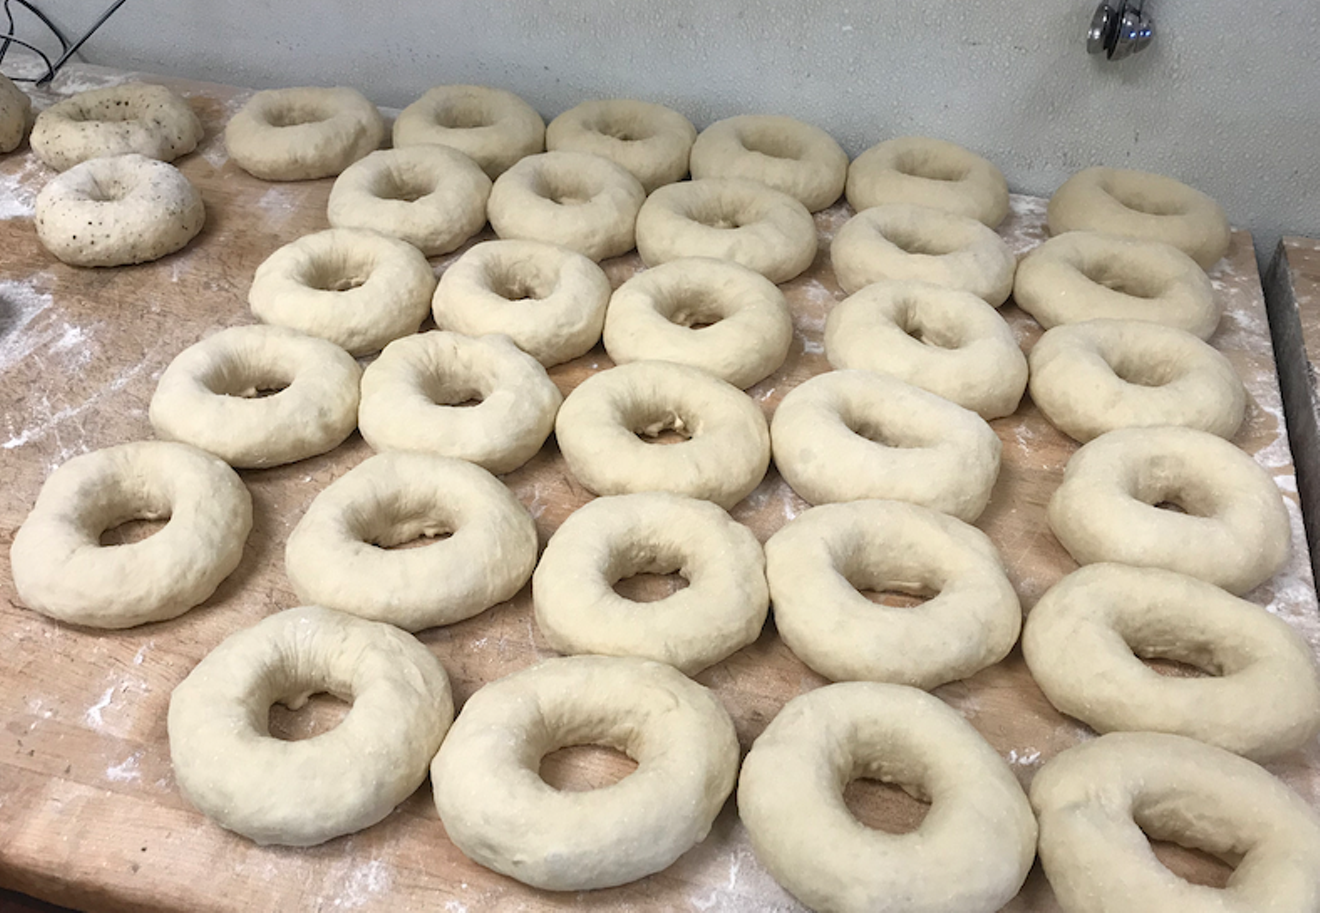 In 24 hours, this hand-rolled dough will be ready to eat.